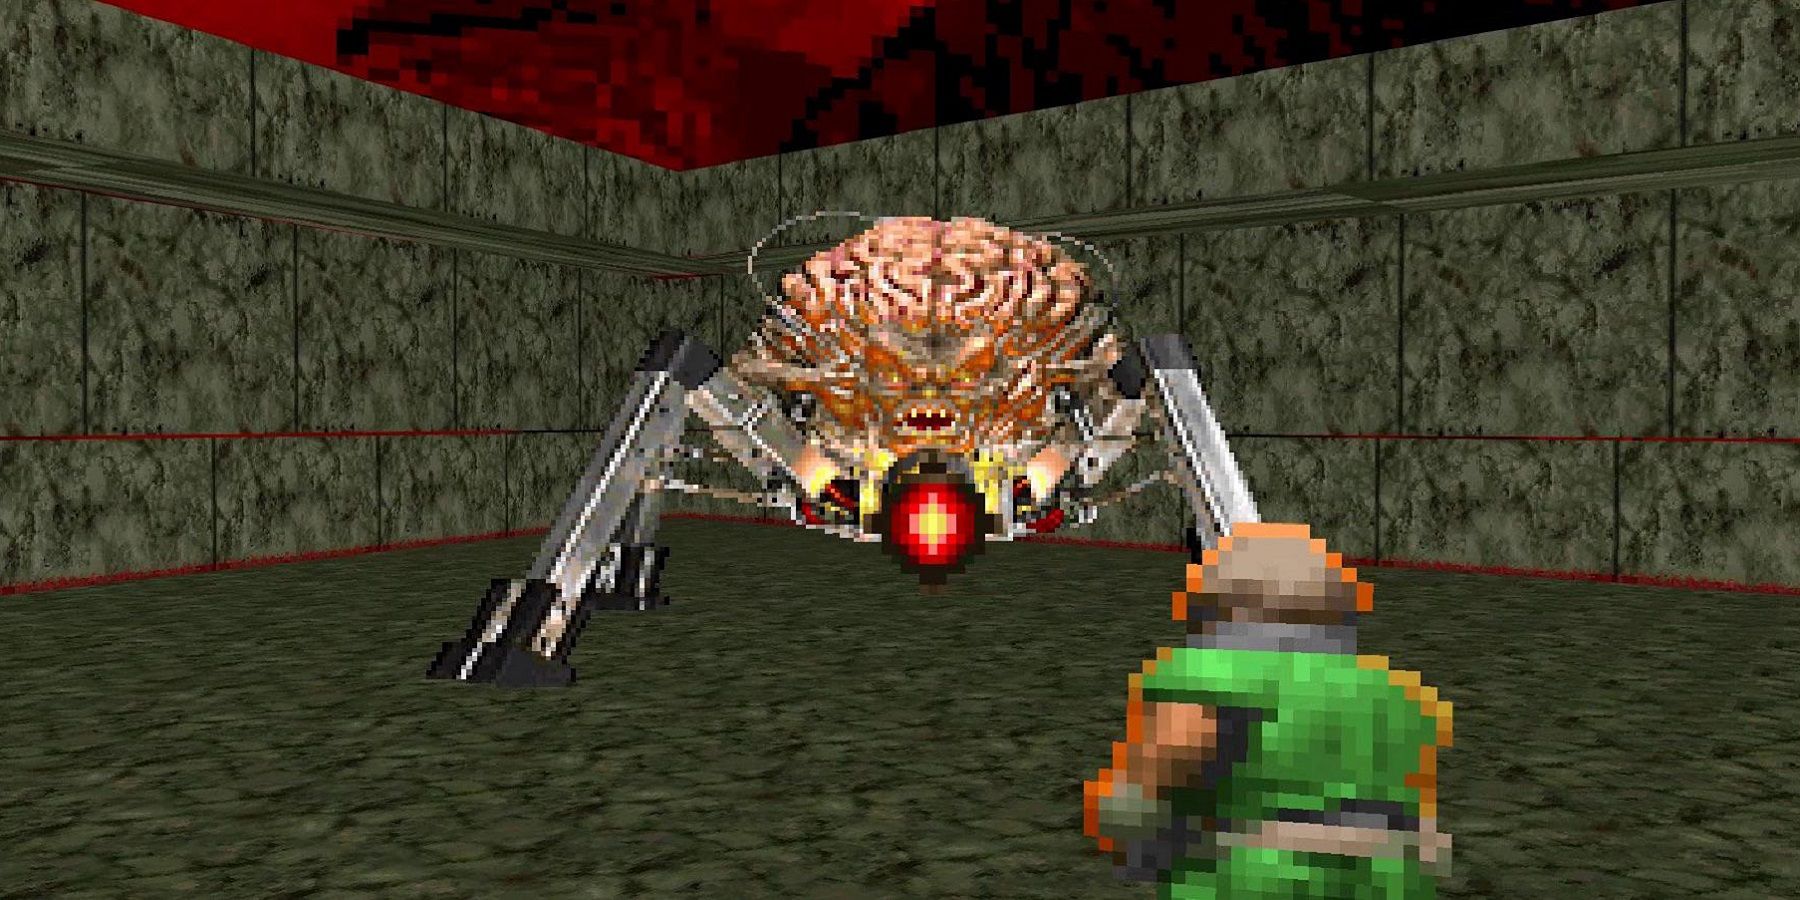 Screenshot from Doom showing the Doomguy fighting the Spider Mastermind.